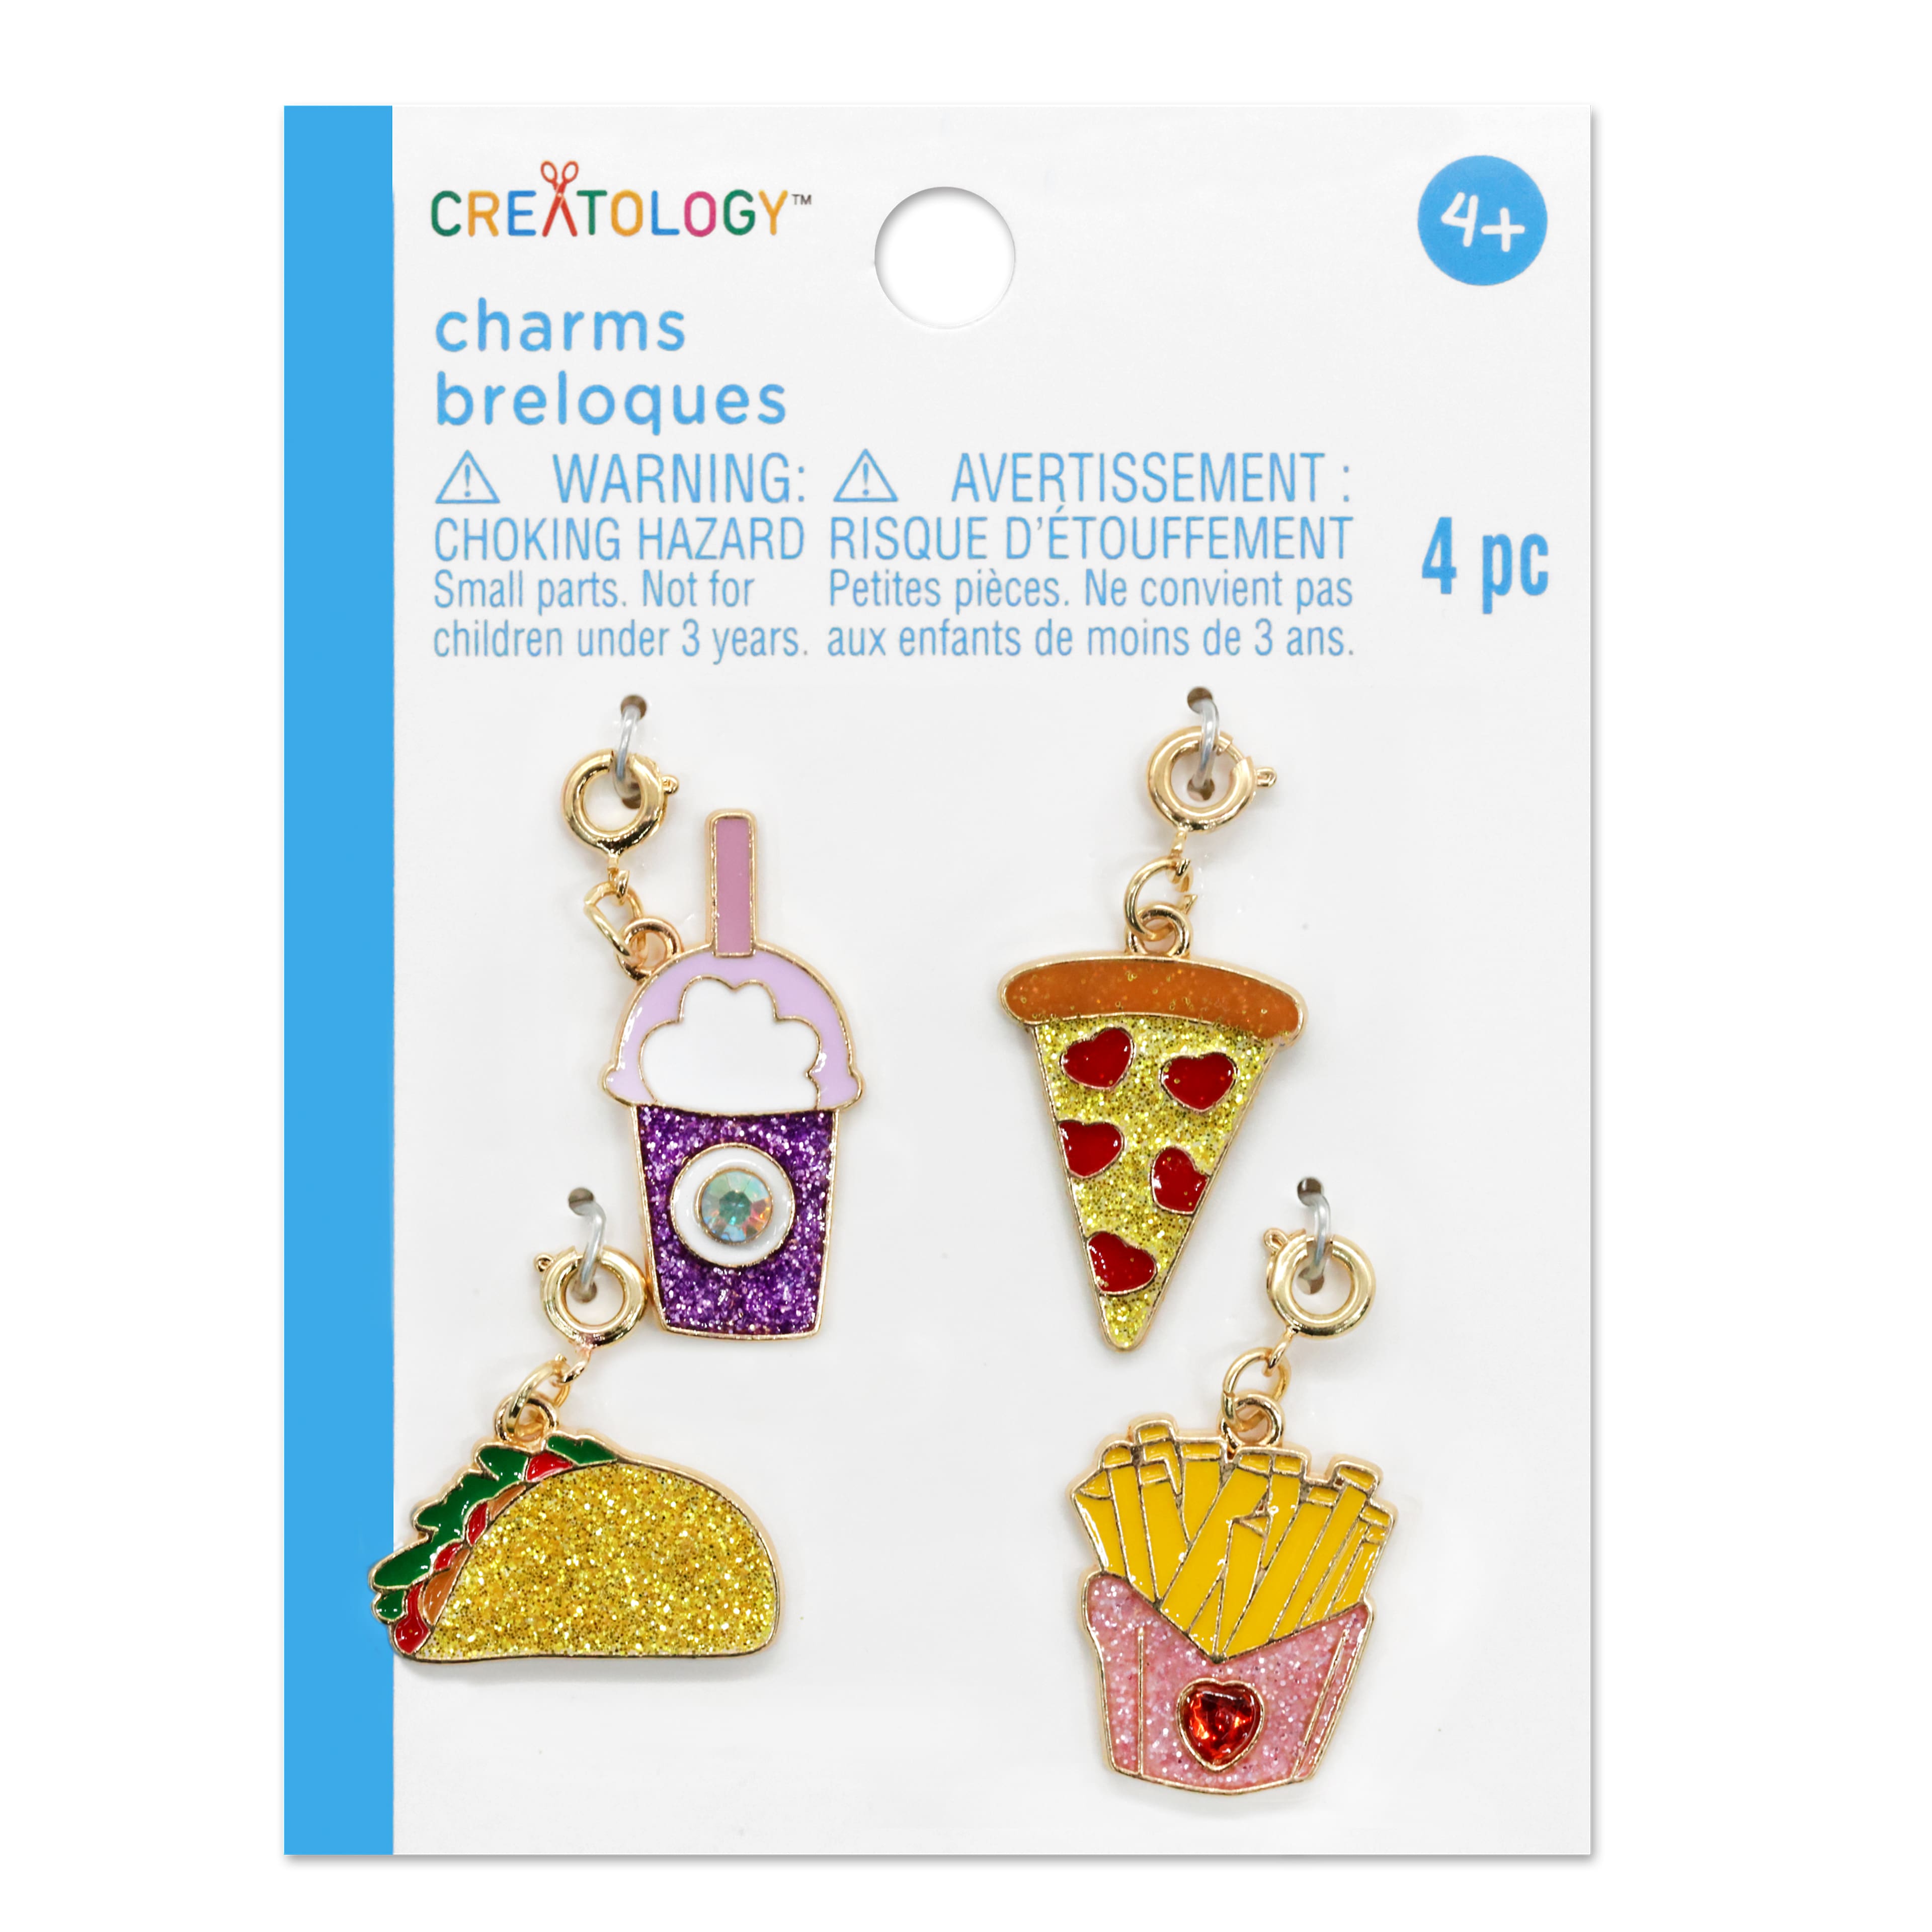 Fruit Charms by Creatology™, 4ct.